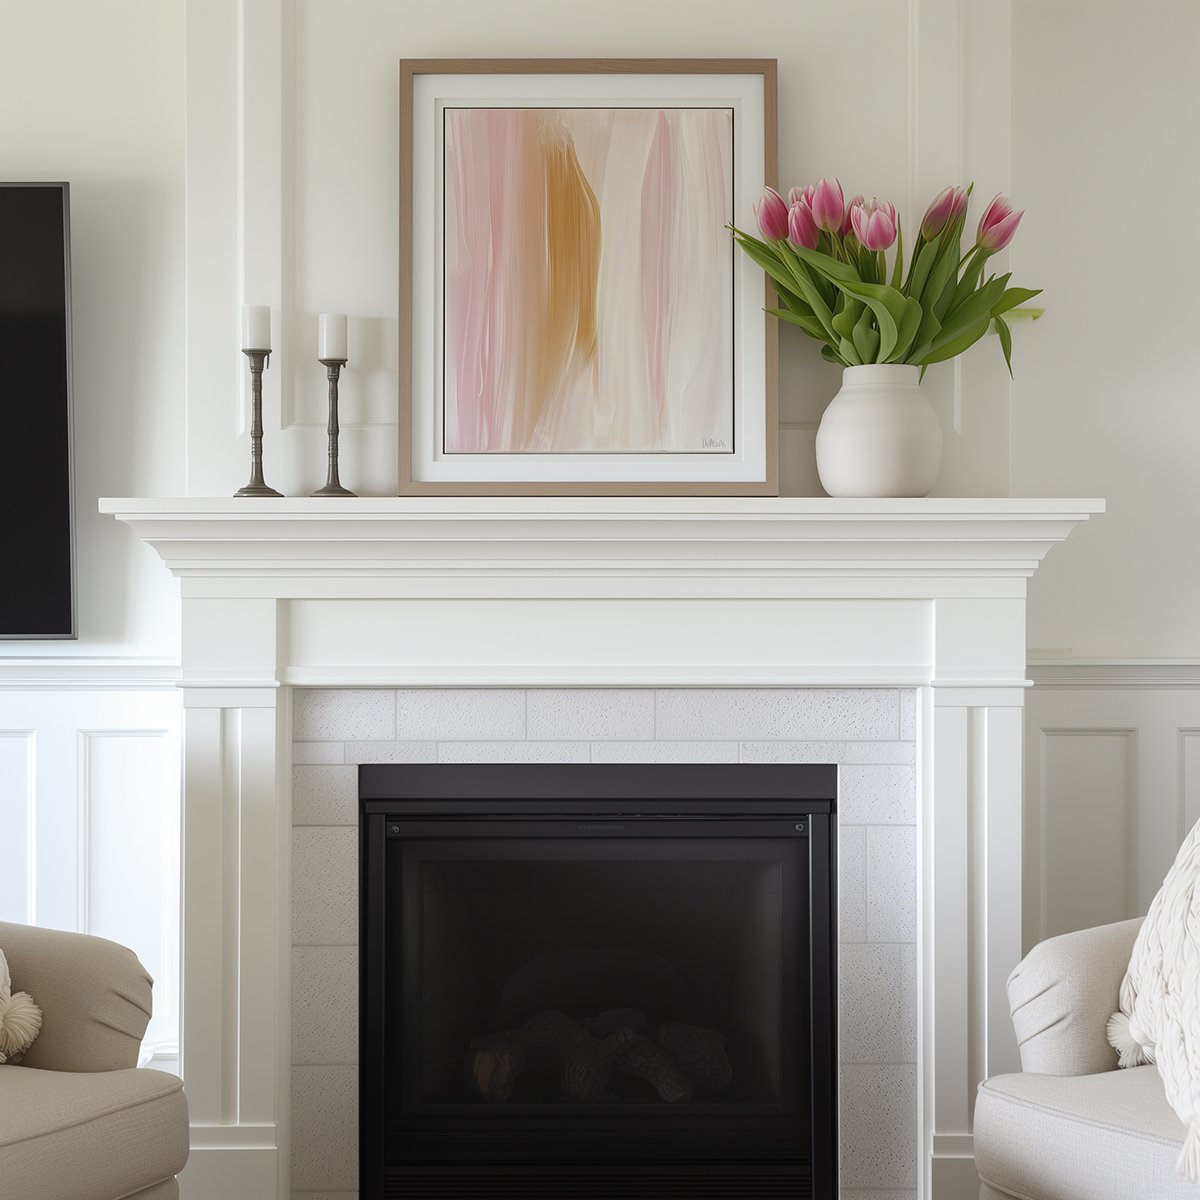 classic white fireplace mantel with pink abstract art, a vase of pink tulips and two candleholders.